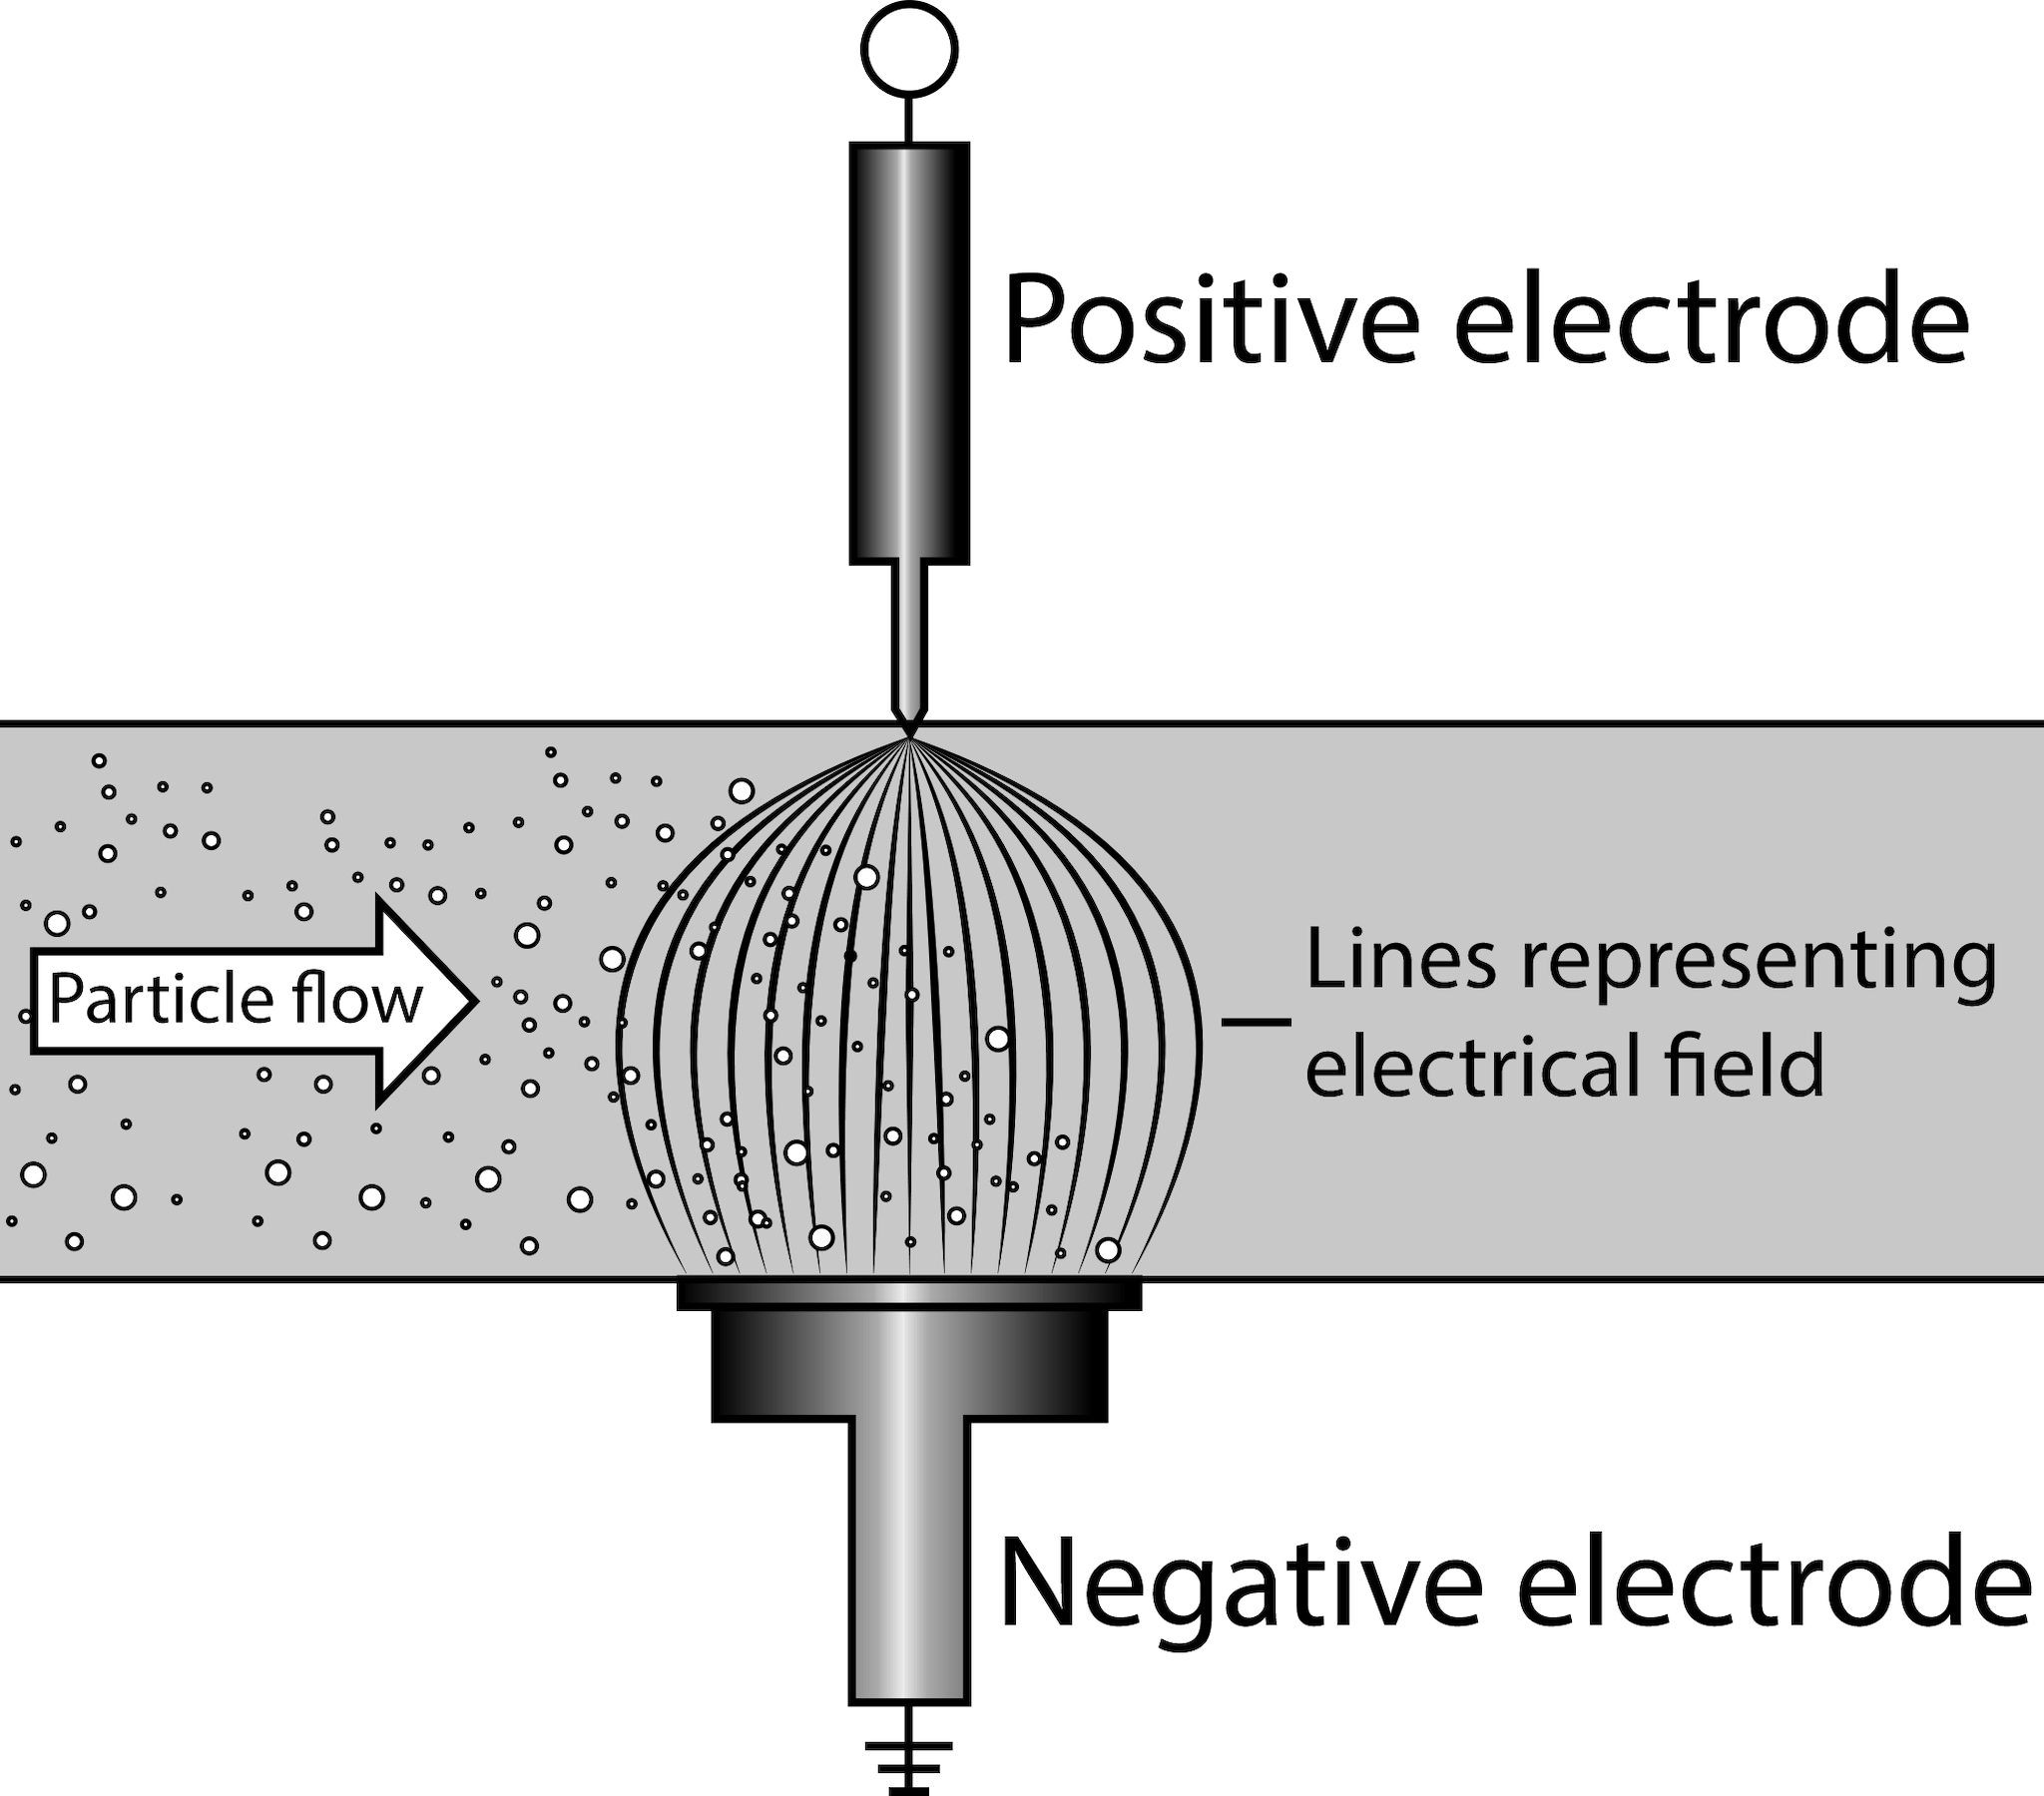 Particles entering the ESPnano inlet pass through a high-voltage electrical field inside the device that simultaneously charges and collects them onto media that rests on the negative electrode plate.